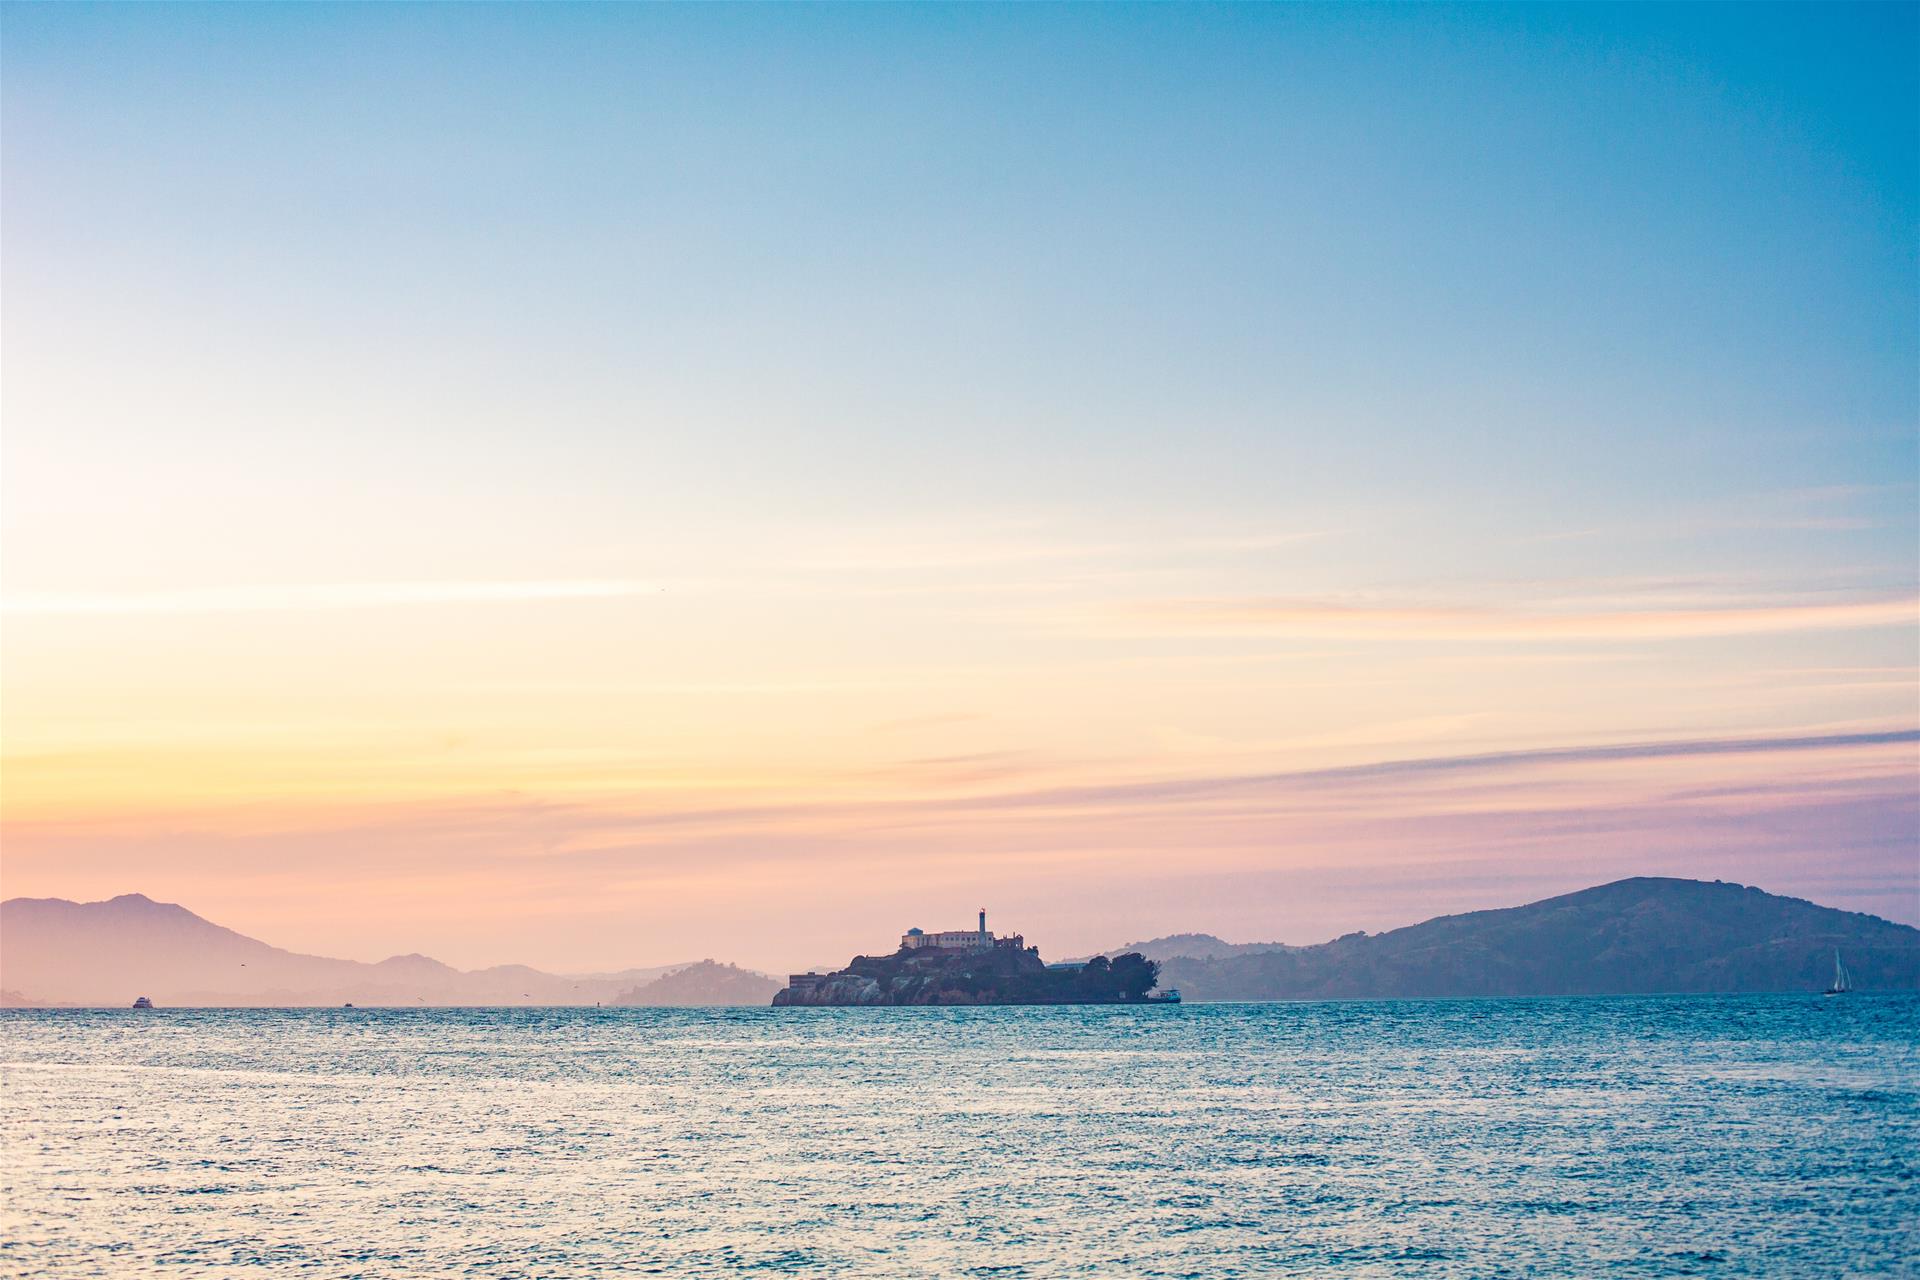 Lonely Alcatraz Island in The Middle of San Francisco Bay Free Image Download